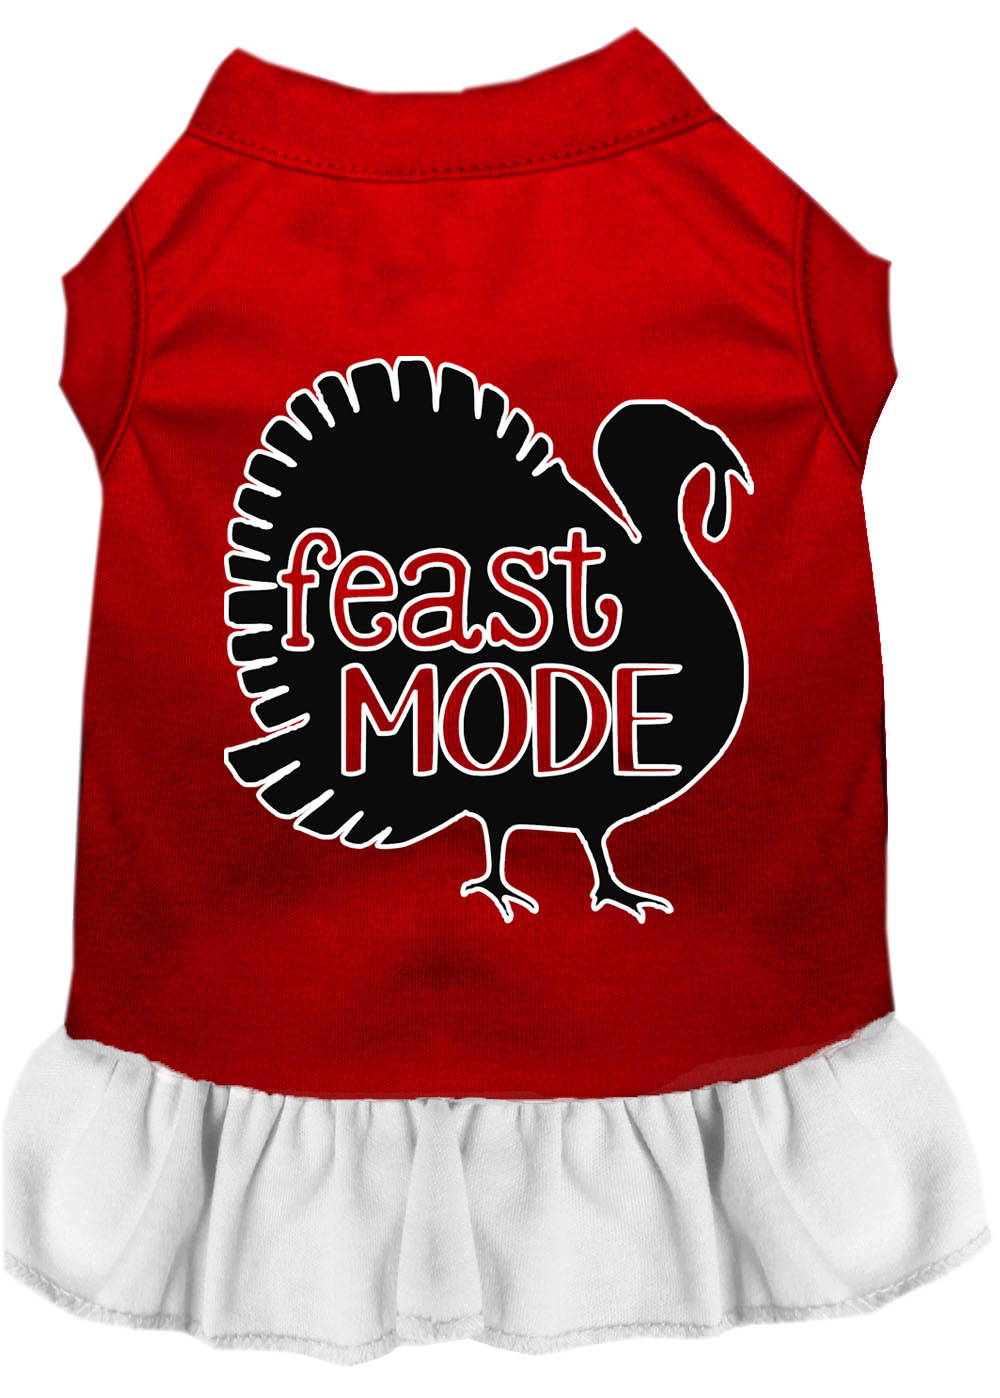 Feast Mode Screen Print Dog Dress Red with White Med